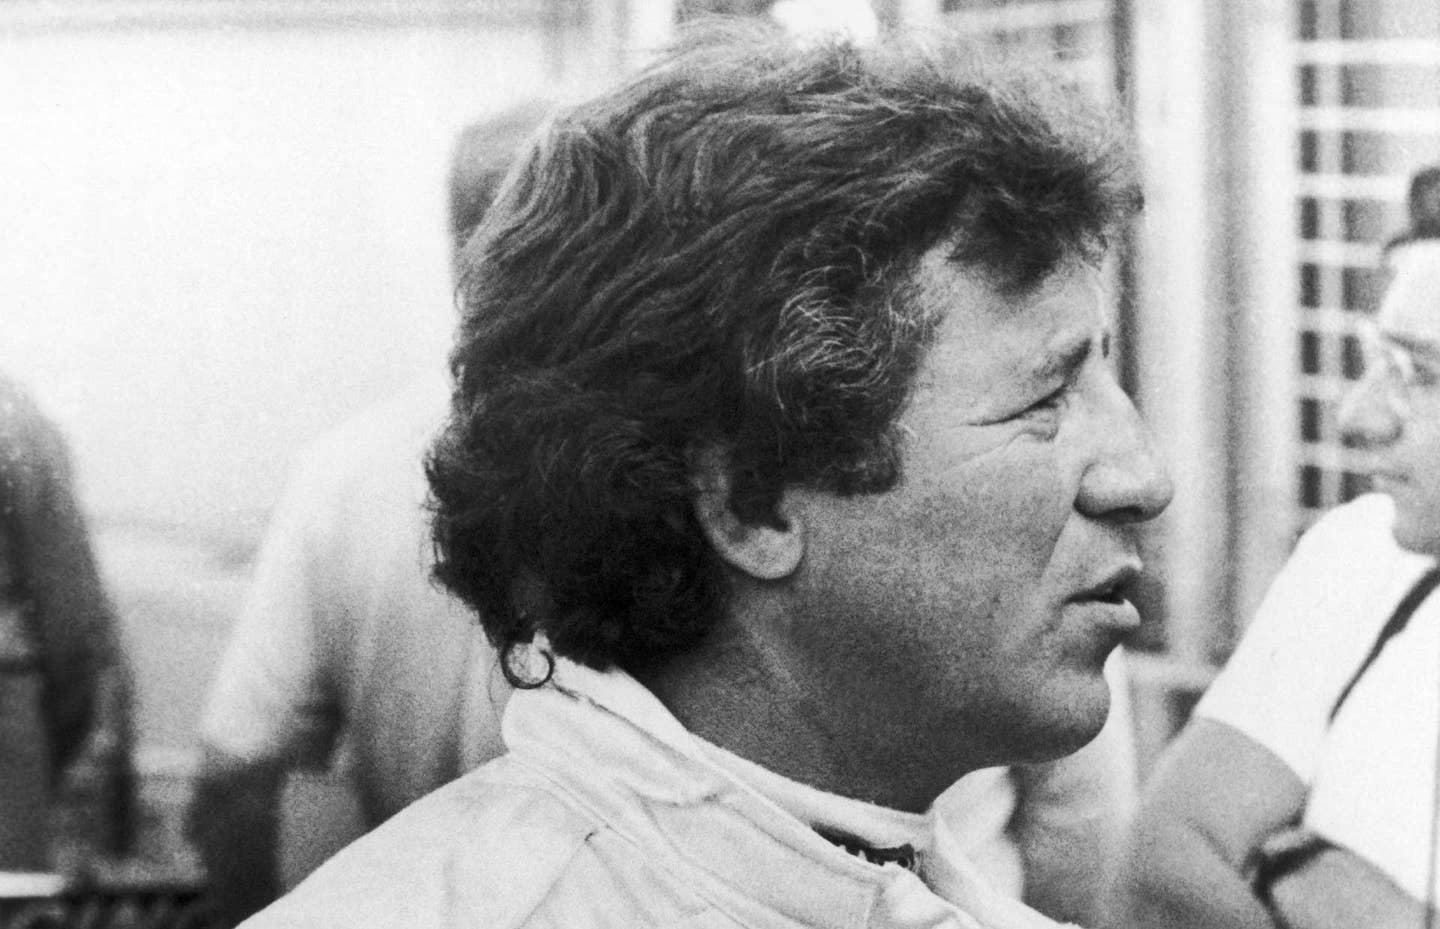 Mario Andretti and the Brutal Magic of Monza